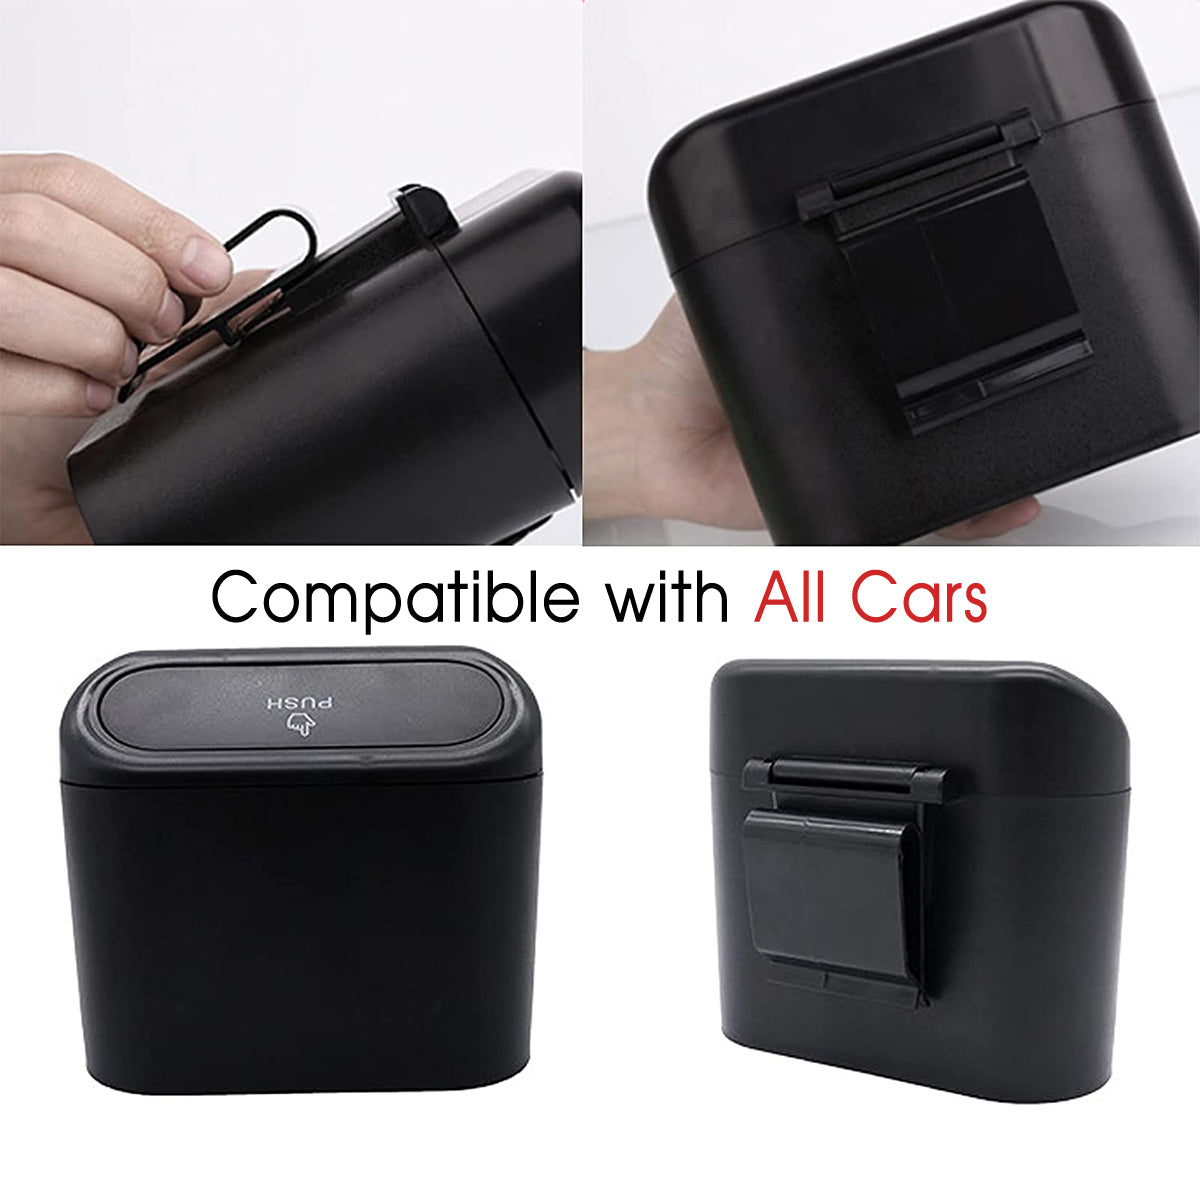 Car Trash Can, Custom For Your Cars, Mini Car Accessories with Lid and Trash Bag, Cute Car Organizer Bin, Small Garbage Can for Storage and Organization, Car Accessories CC11996